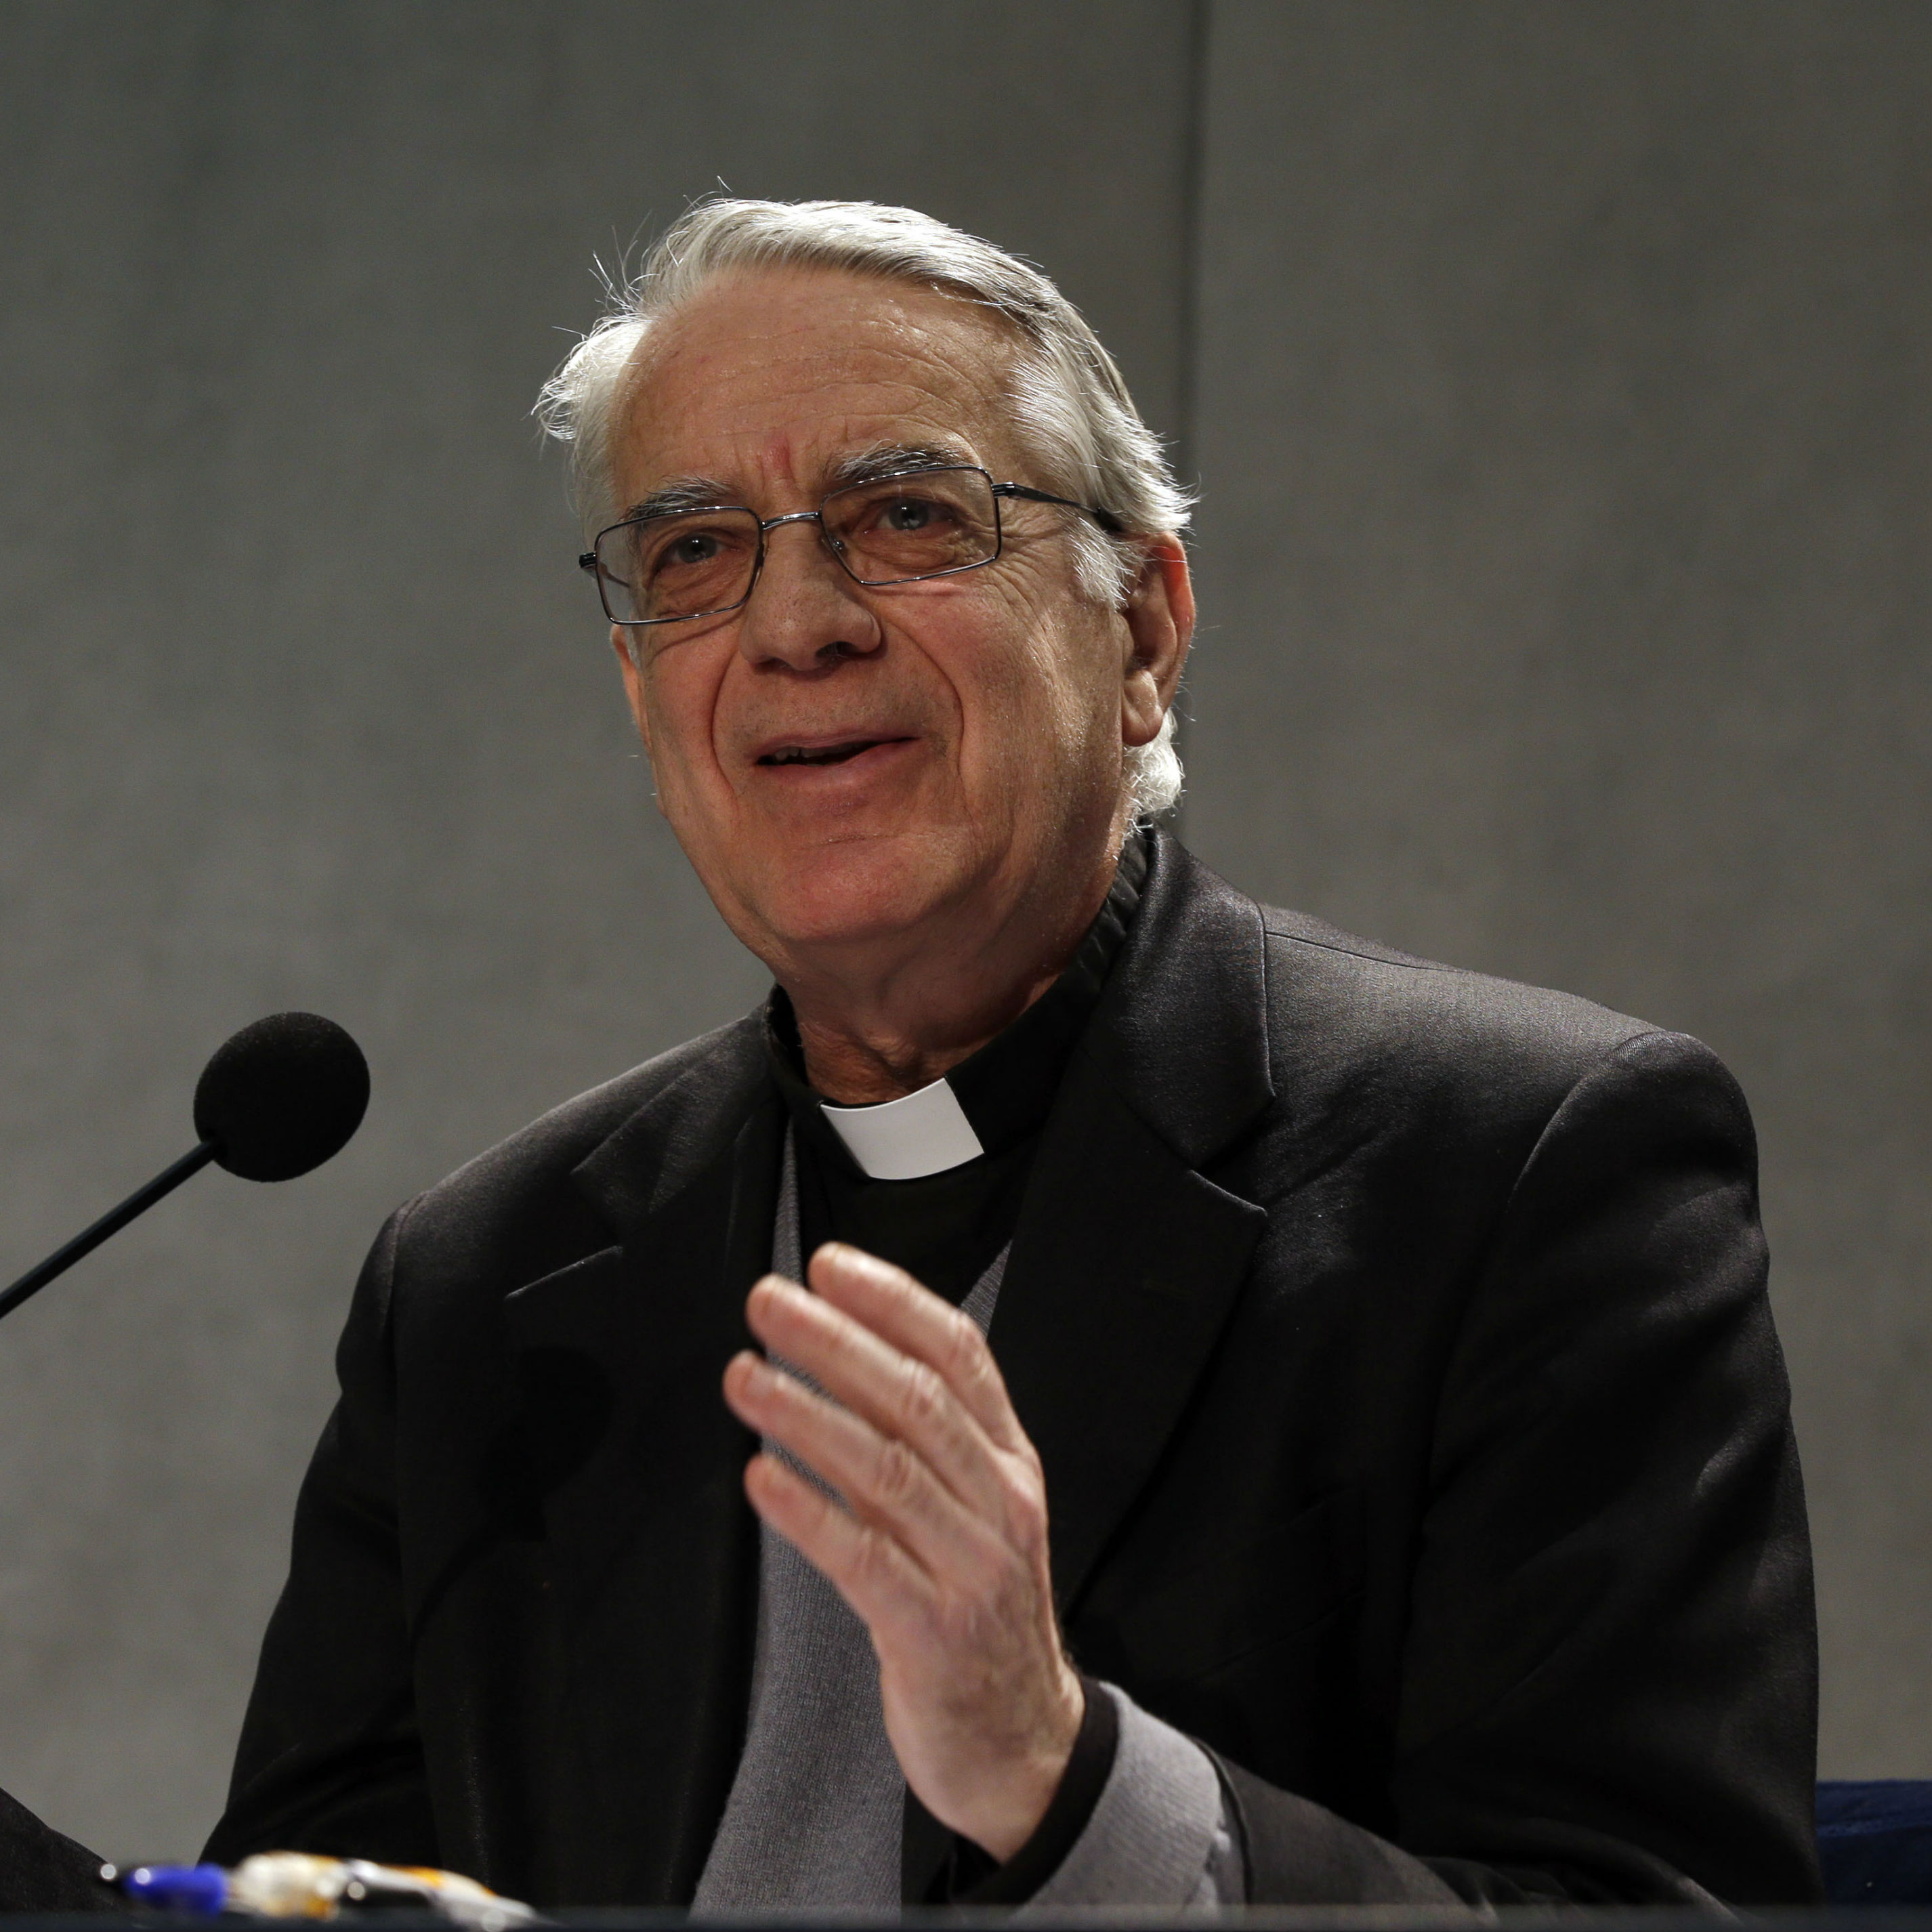 New deaconess commission is not pathway to ordination of women priests, says Vatican spokesman